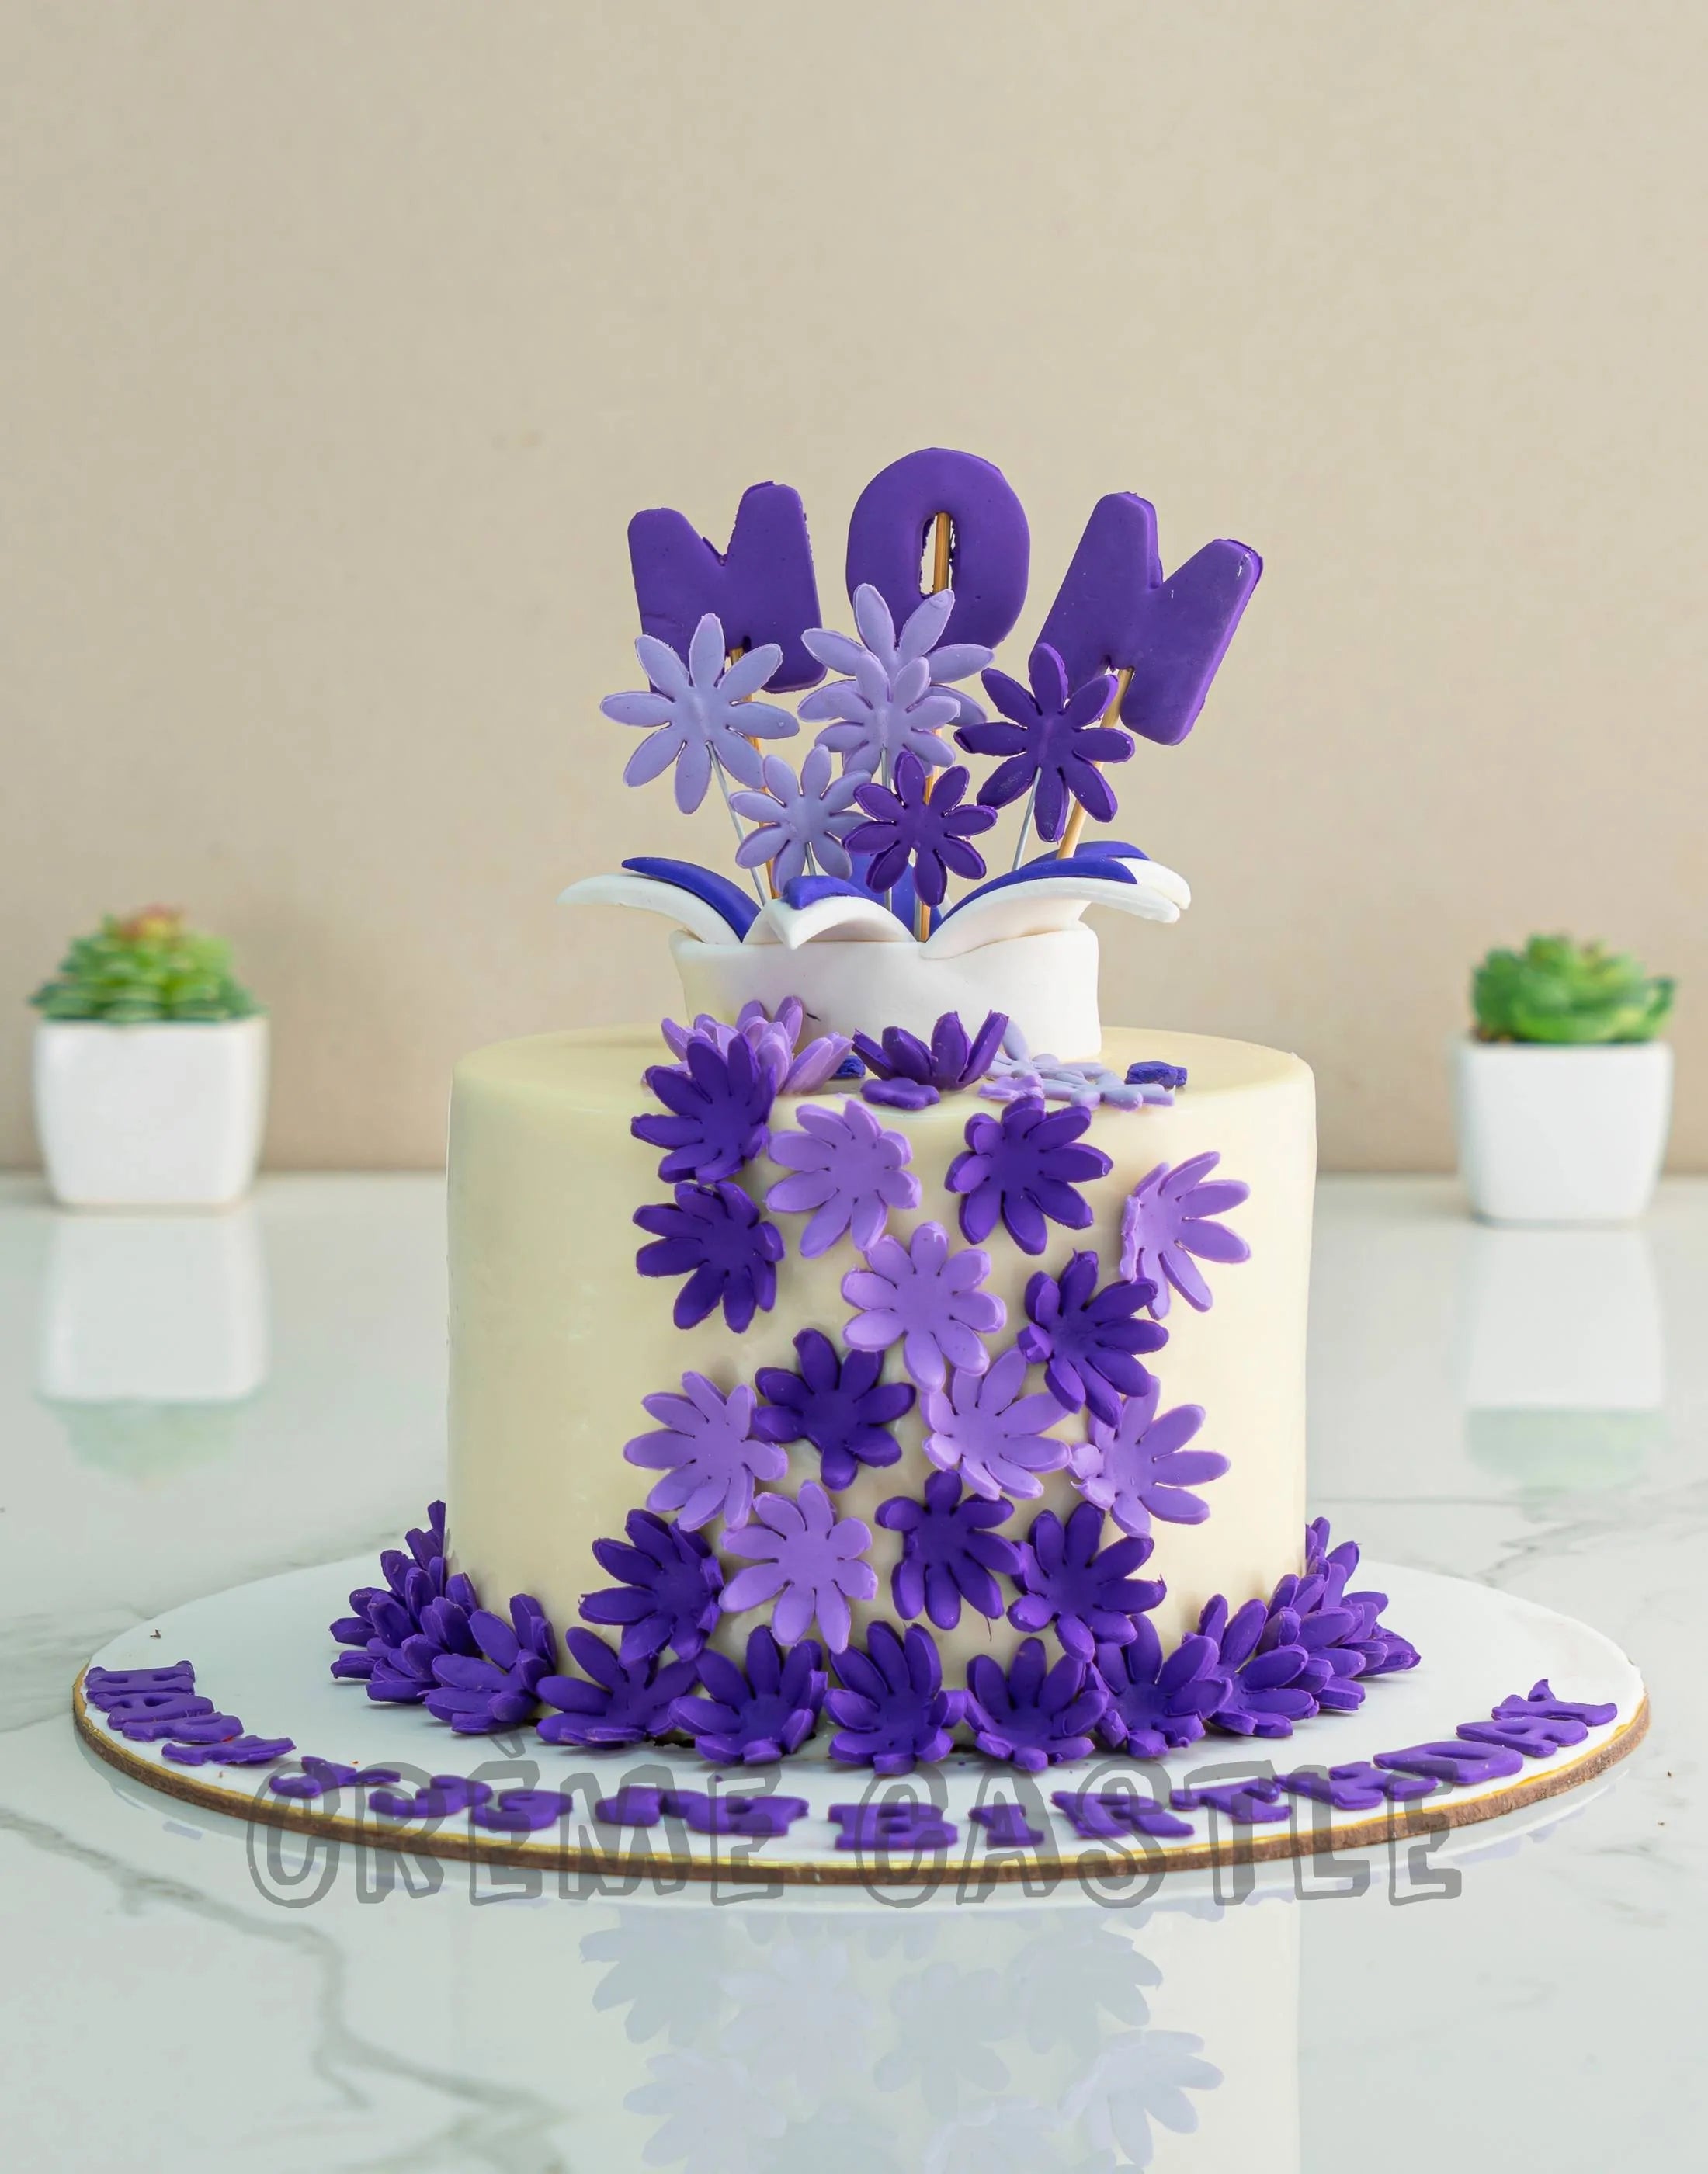 Creamy Treat For Mother - Cake O Clock - Best Customize Designer Cakes  Lahore